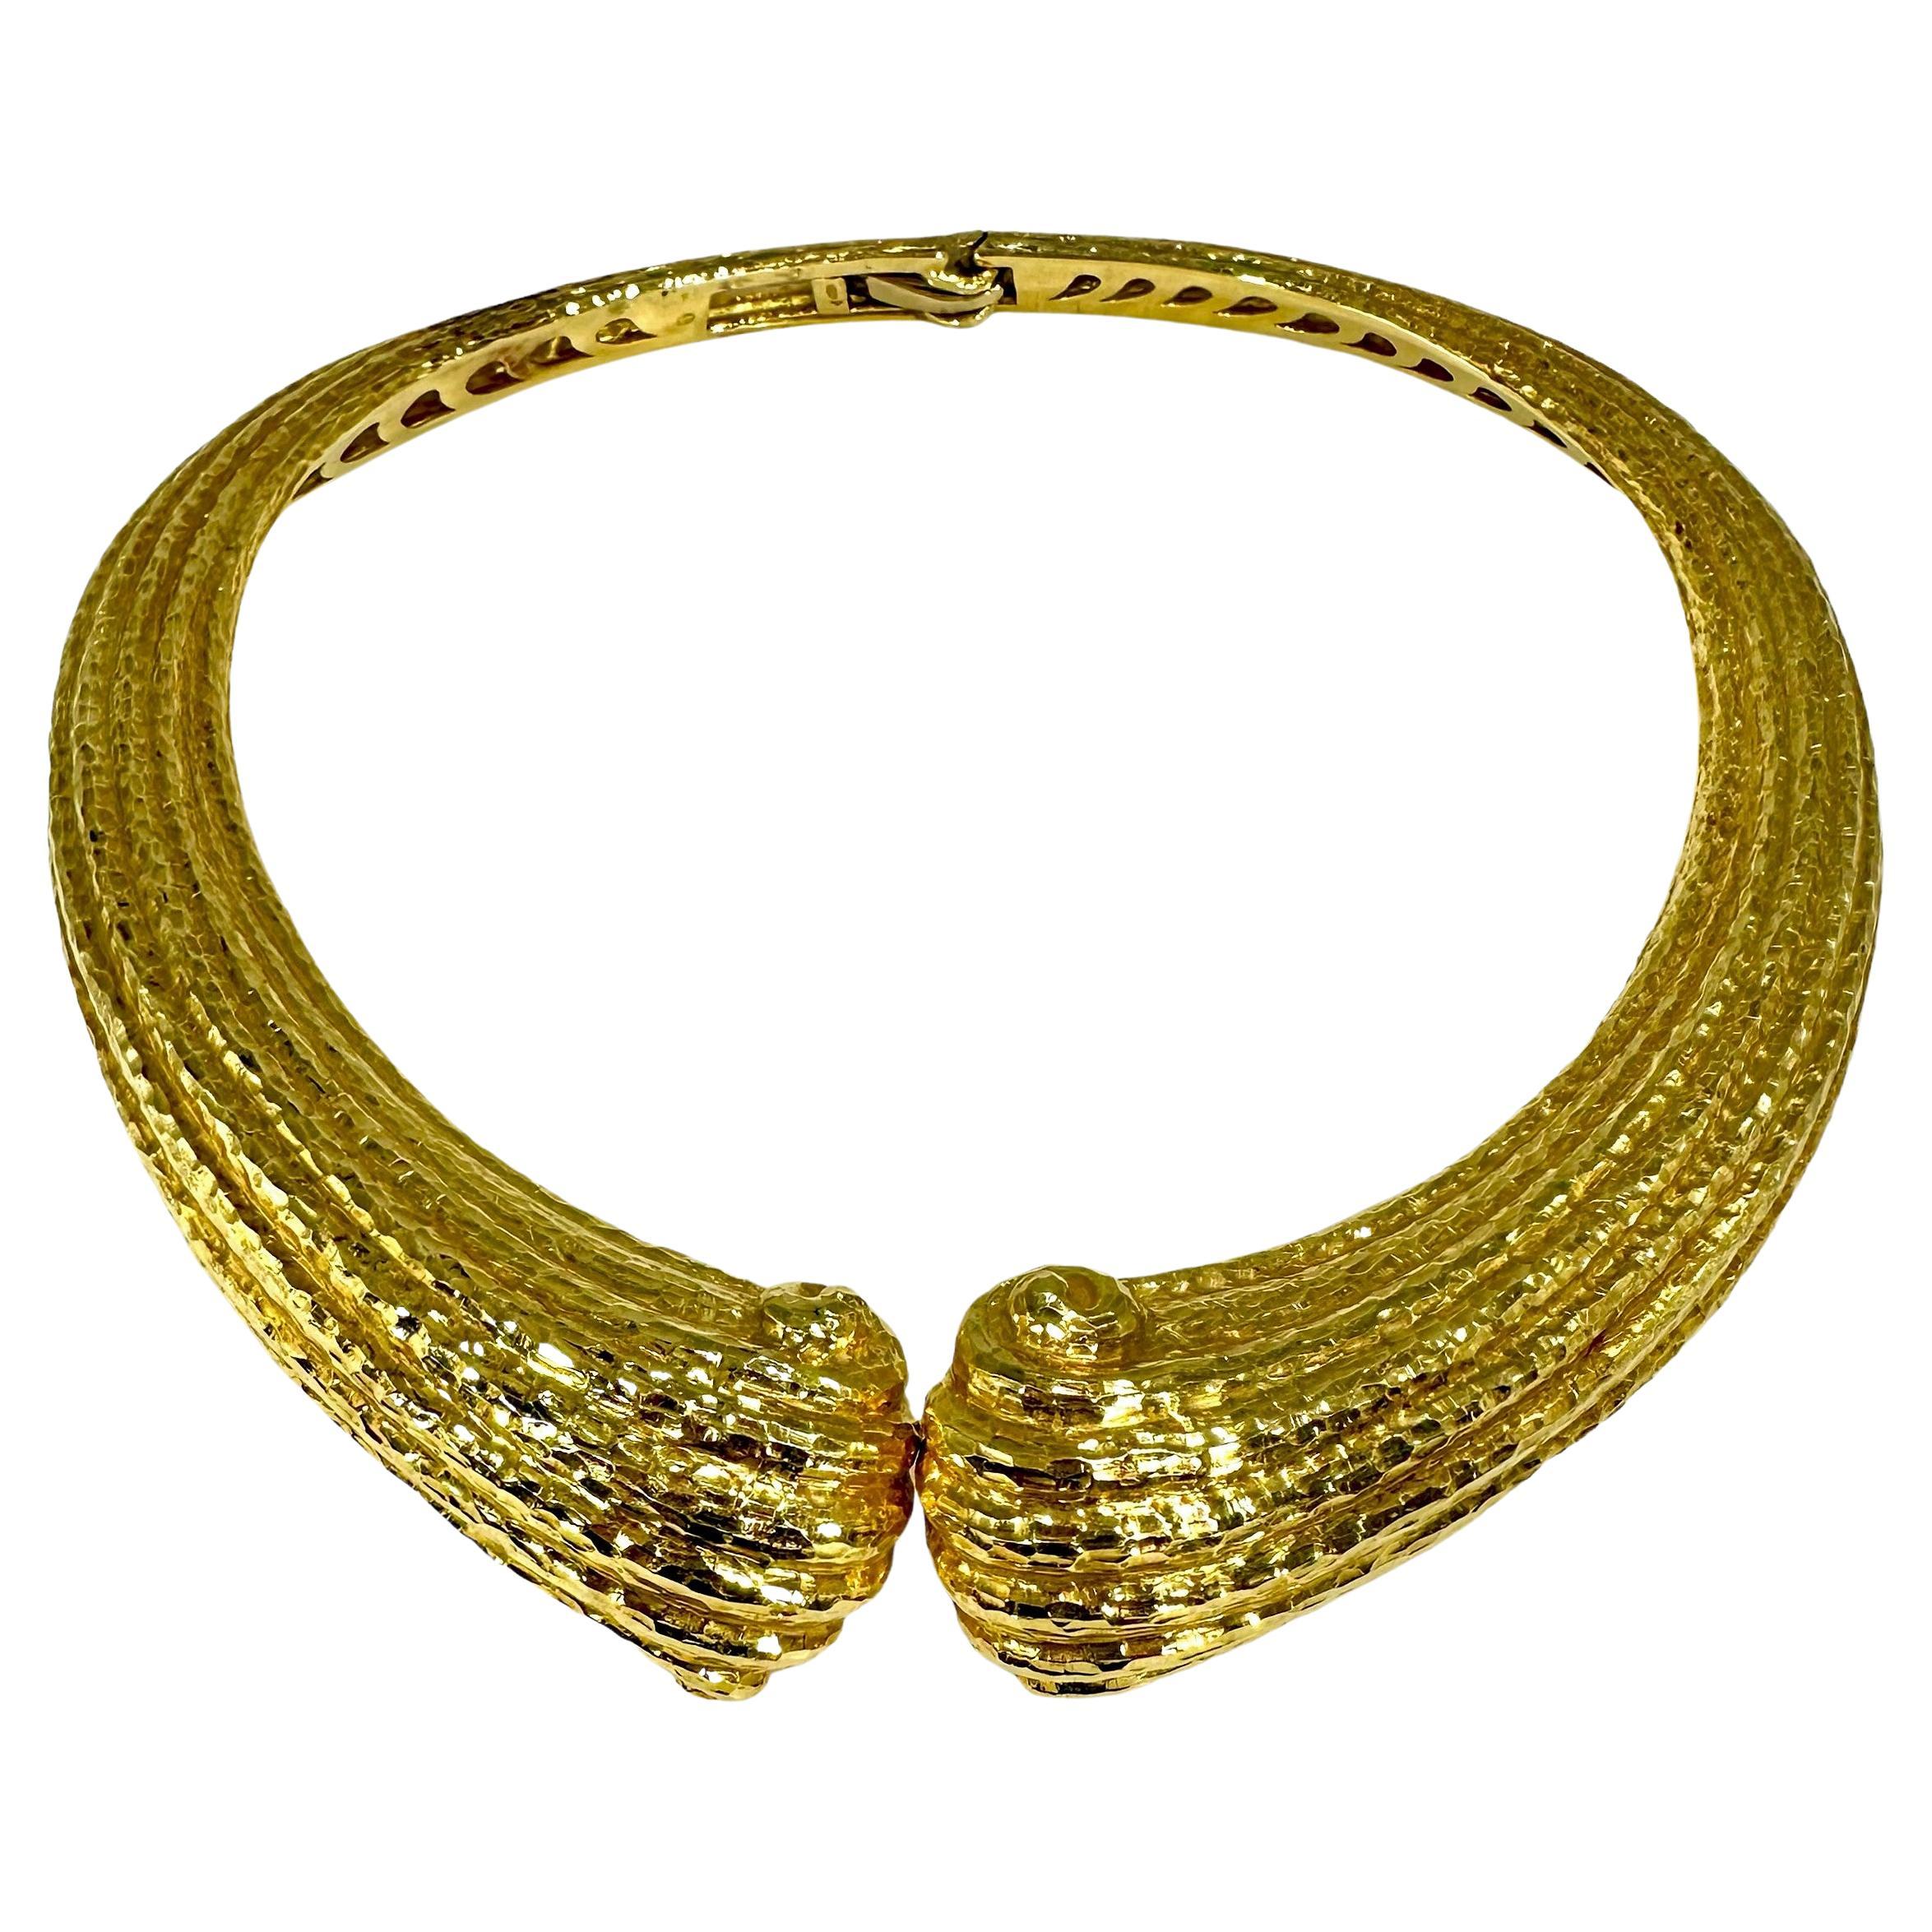 Massive 18K Yellow Gold, Hammered Finish, Italian Scroll Motif Choker Necklace For Sale